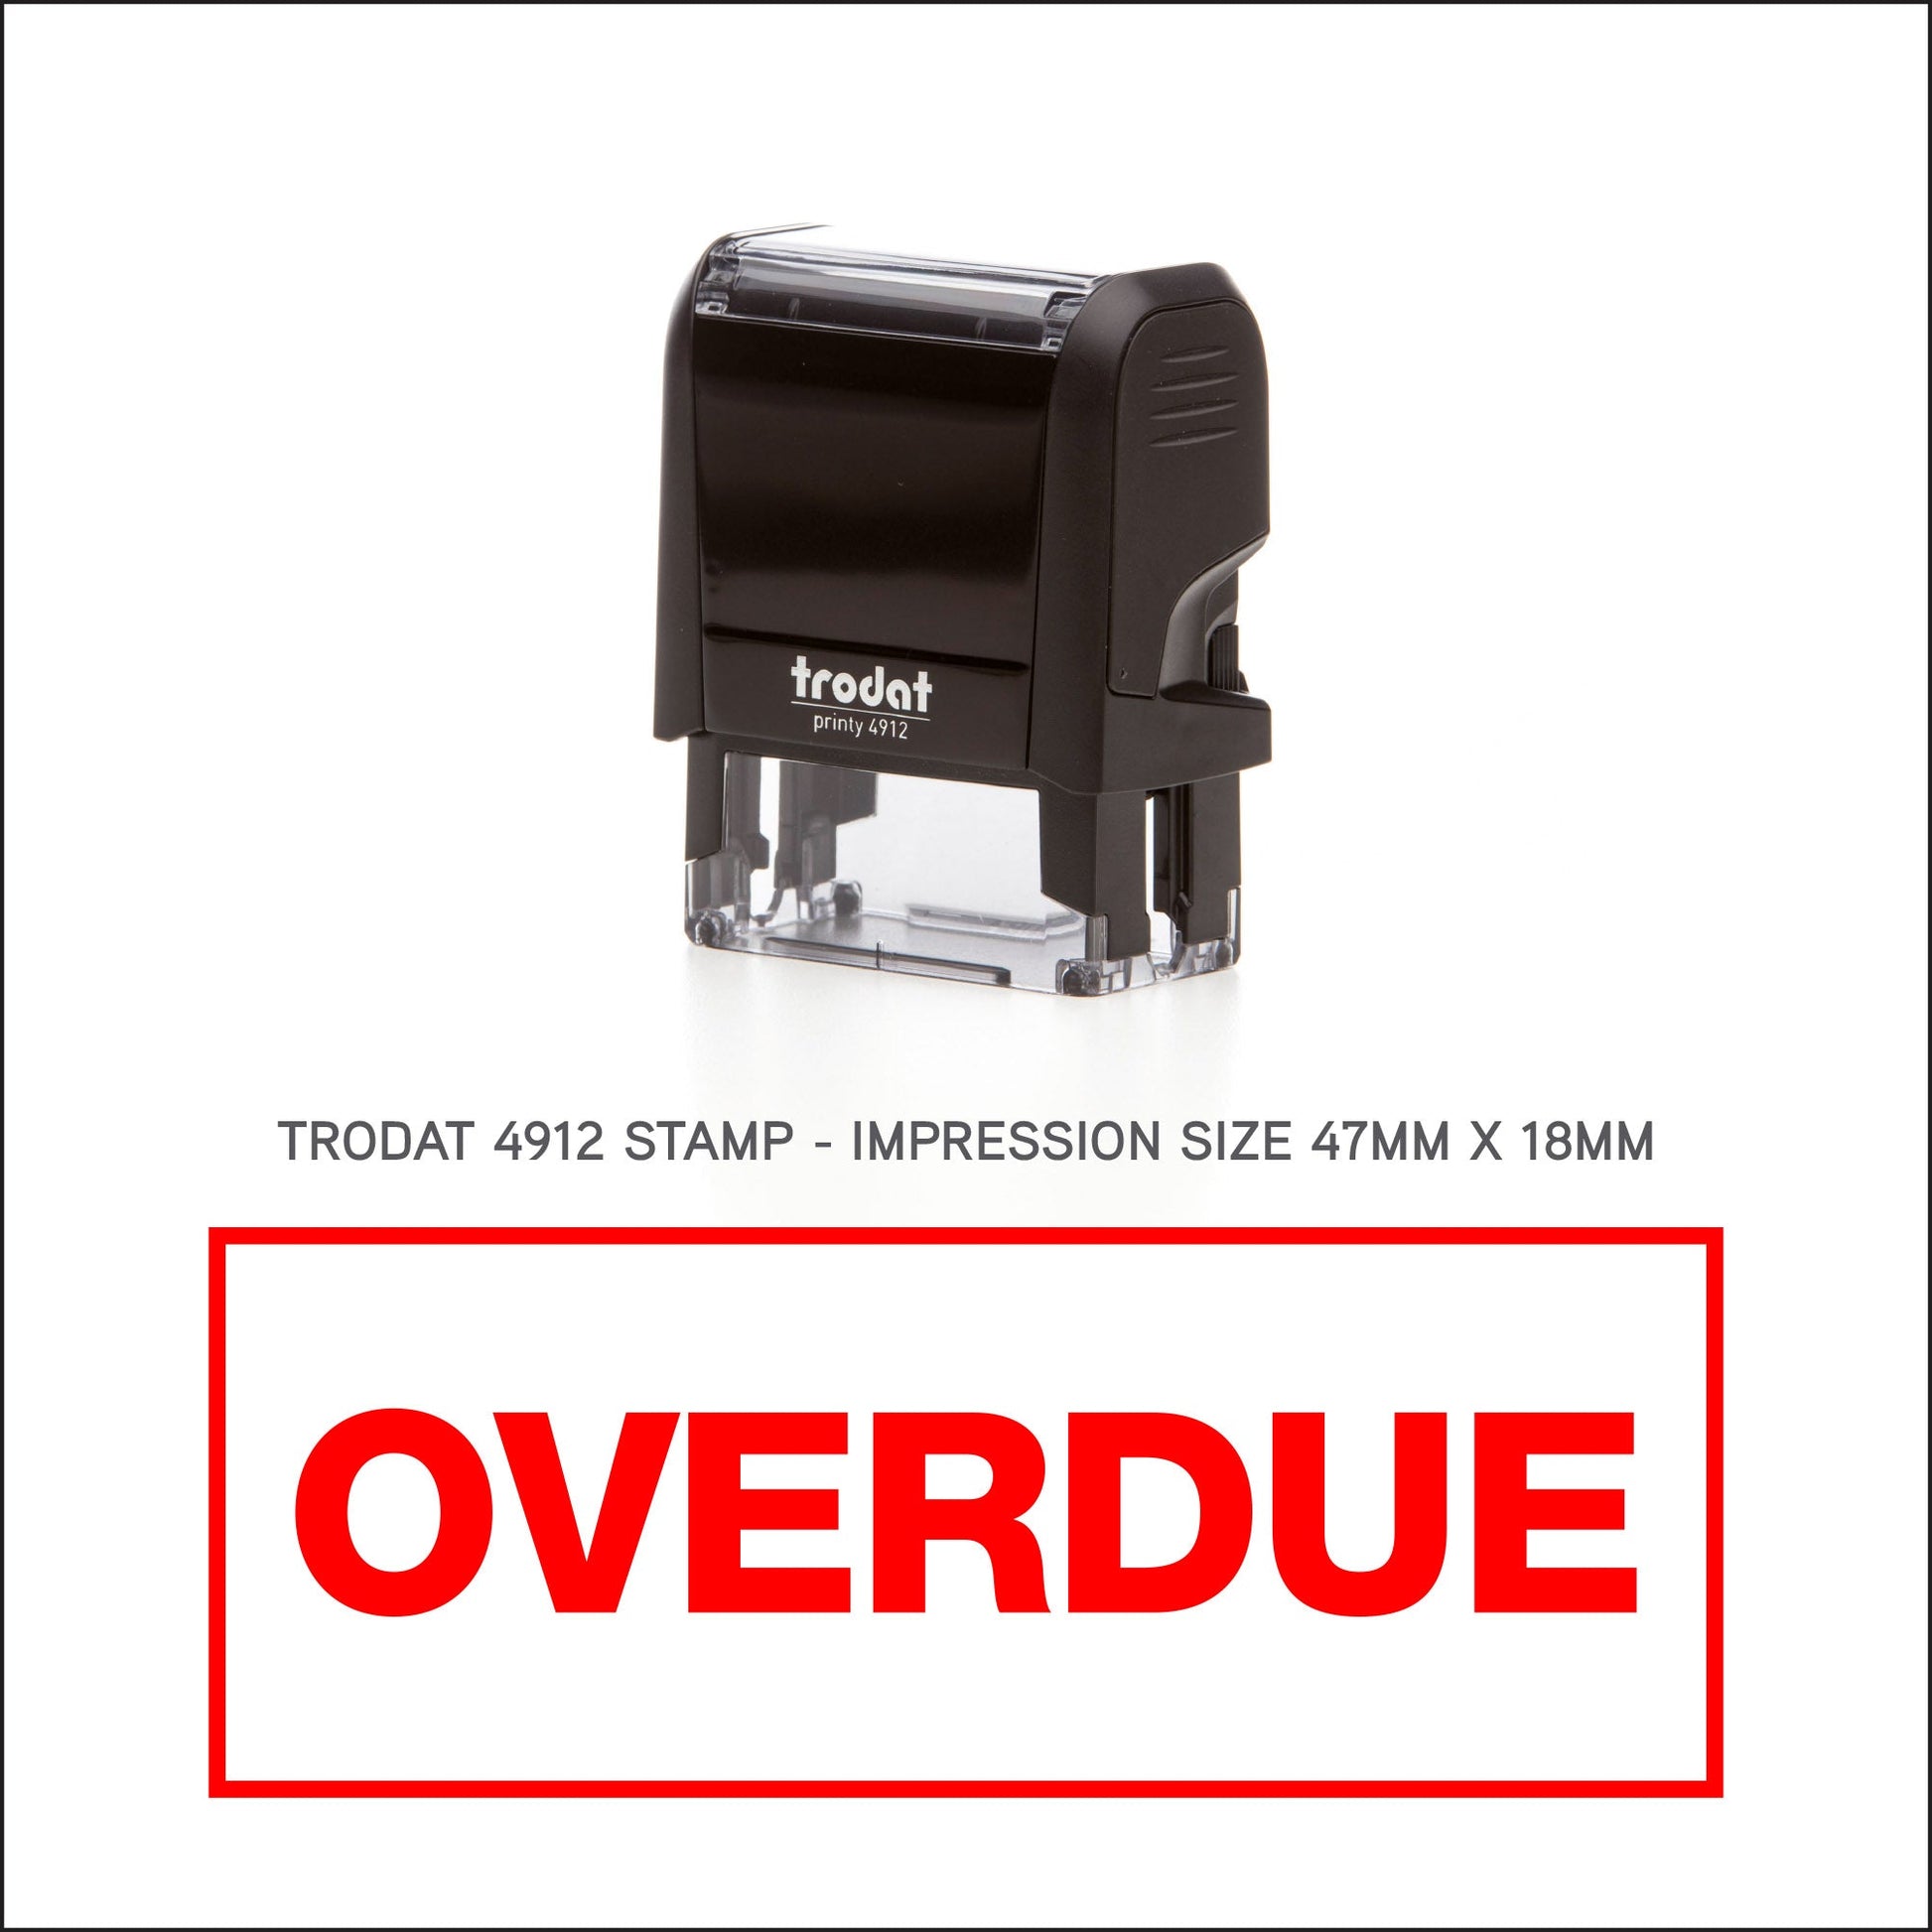 Overdue - Rubber Stamp - Trodat 4912 - 45mm x 18mm Impression